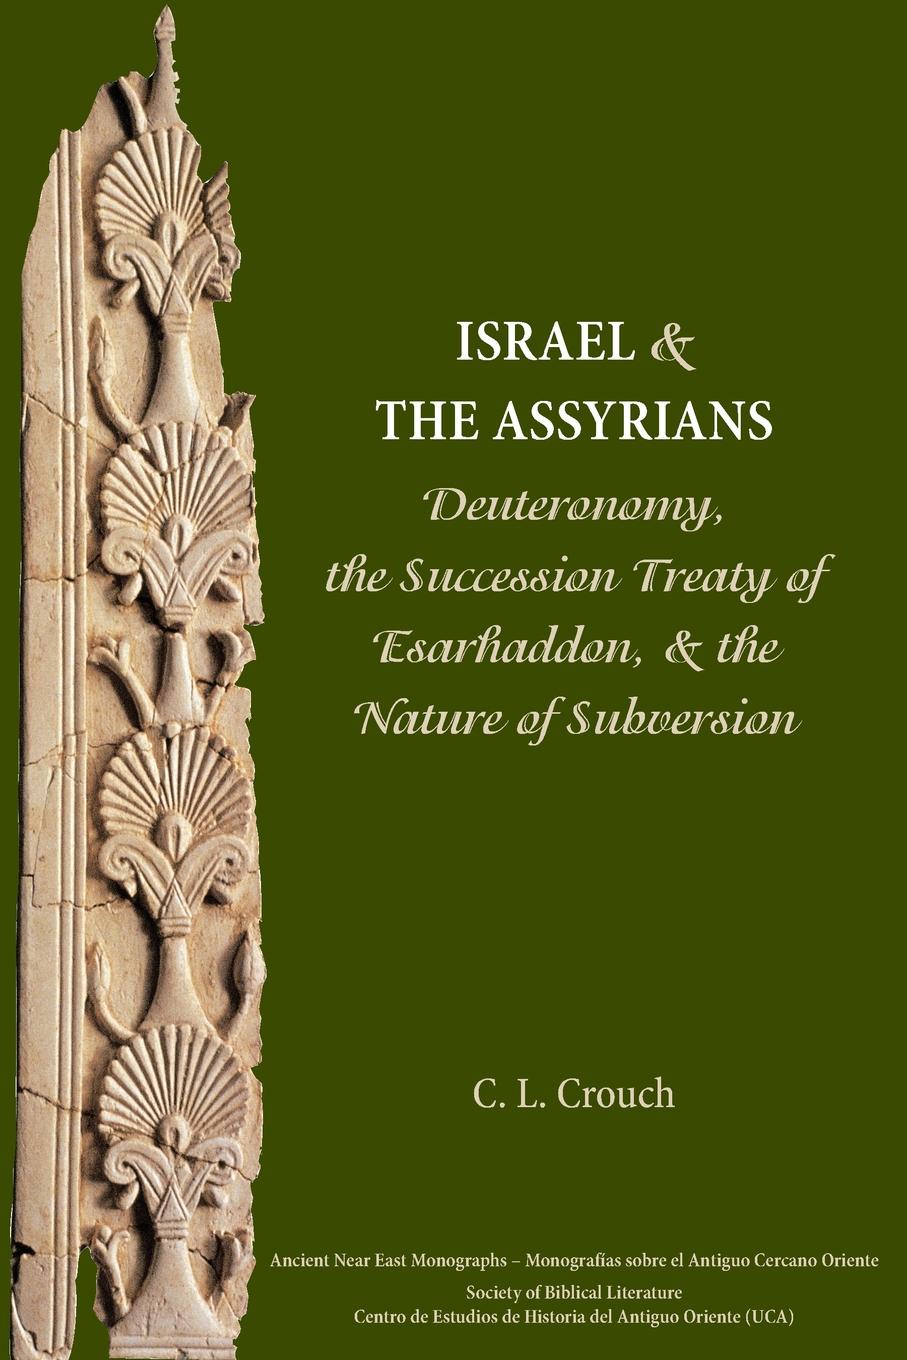 Israel and the Assyrians. Deuteronomy, the Succession Treaty of Esarhaddon, and the Nature of Subversion